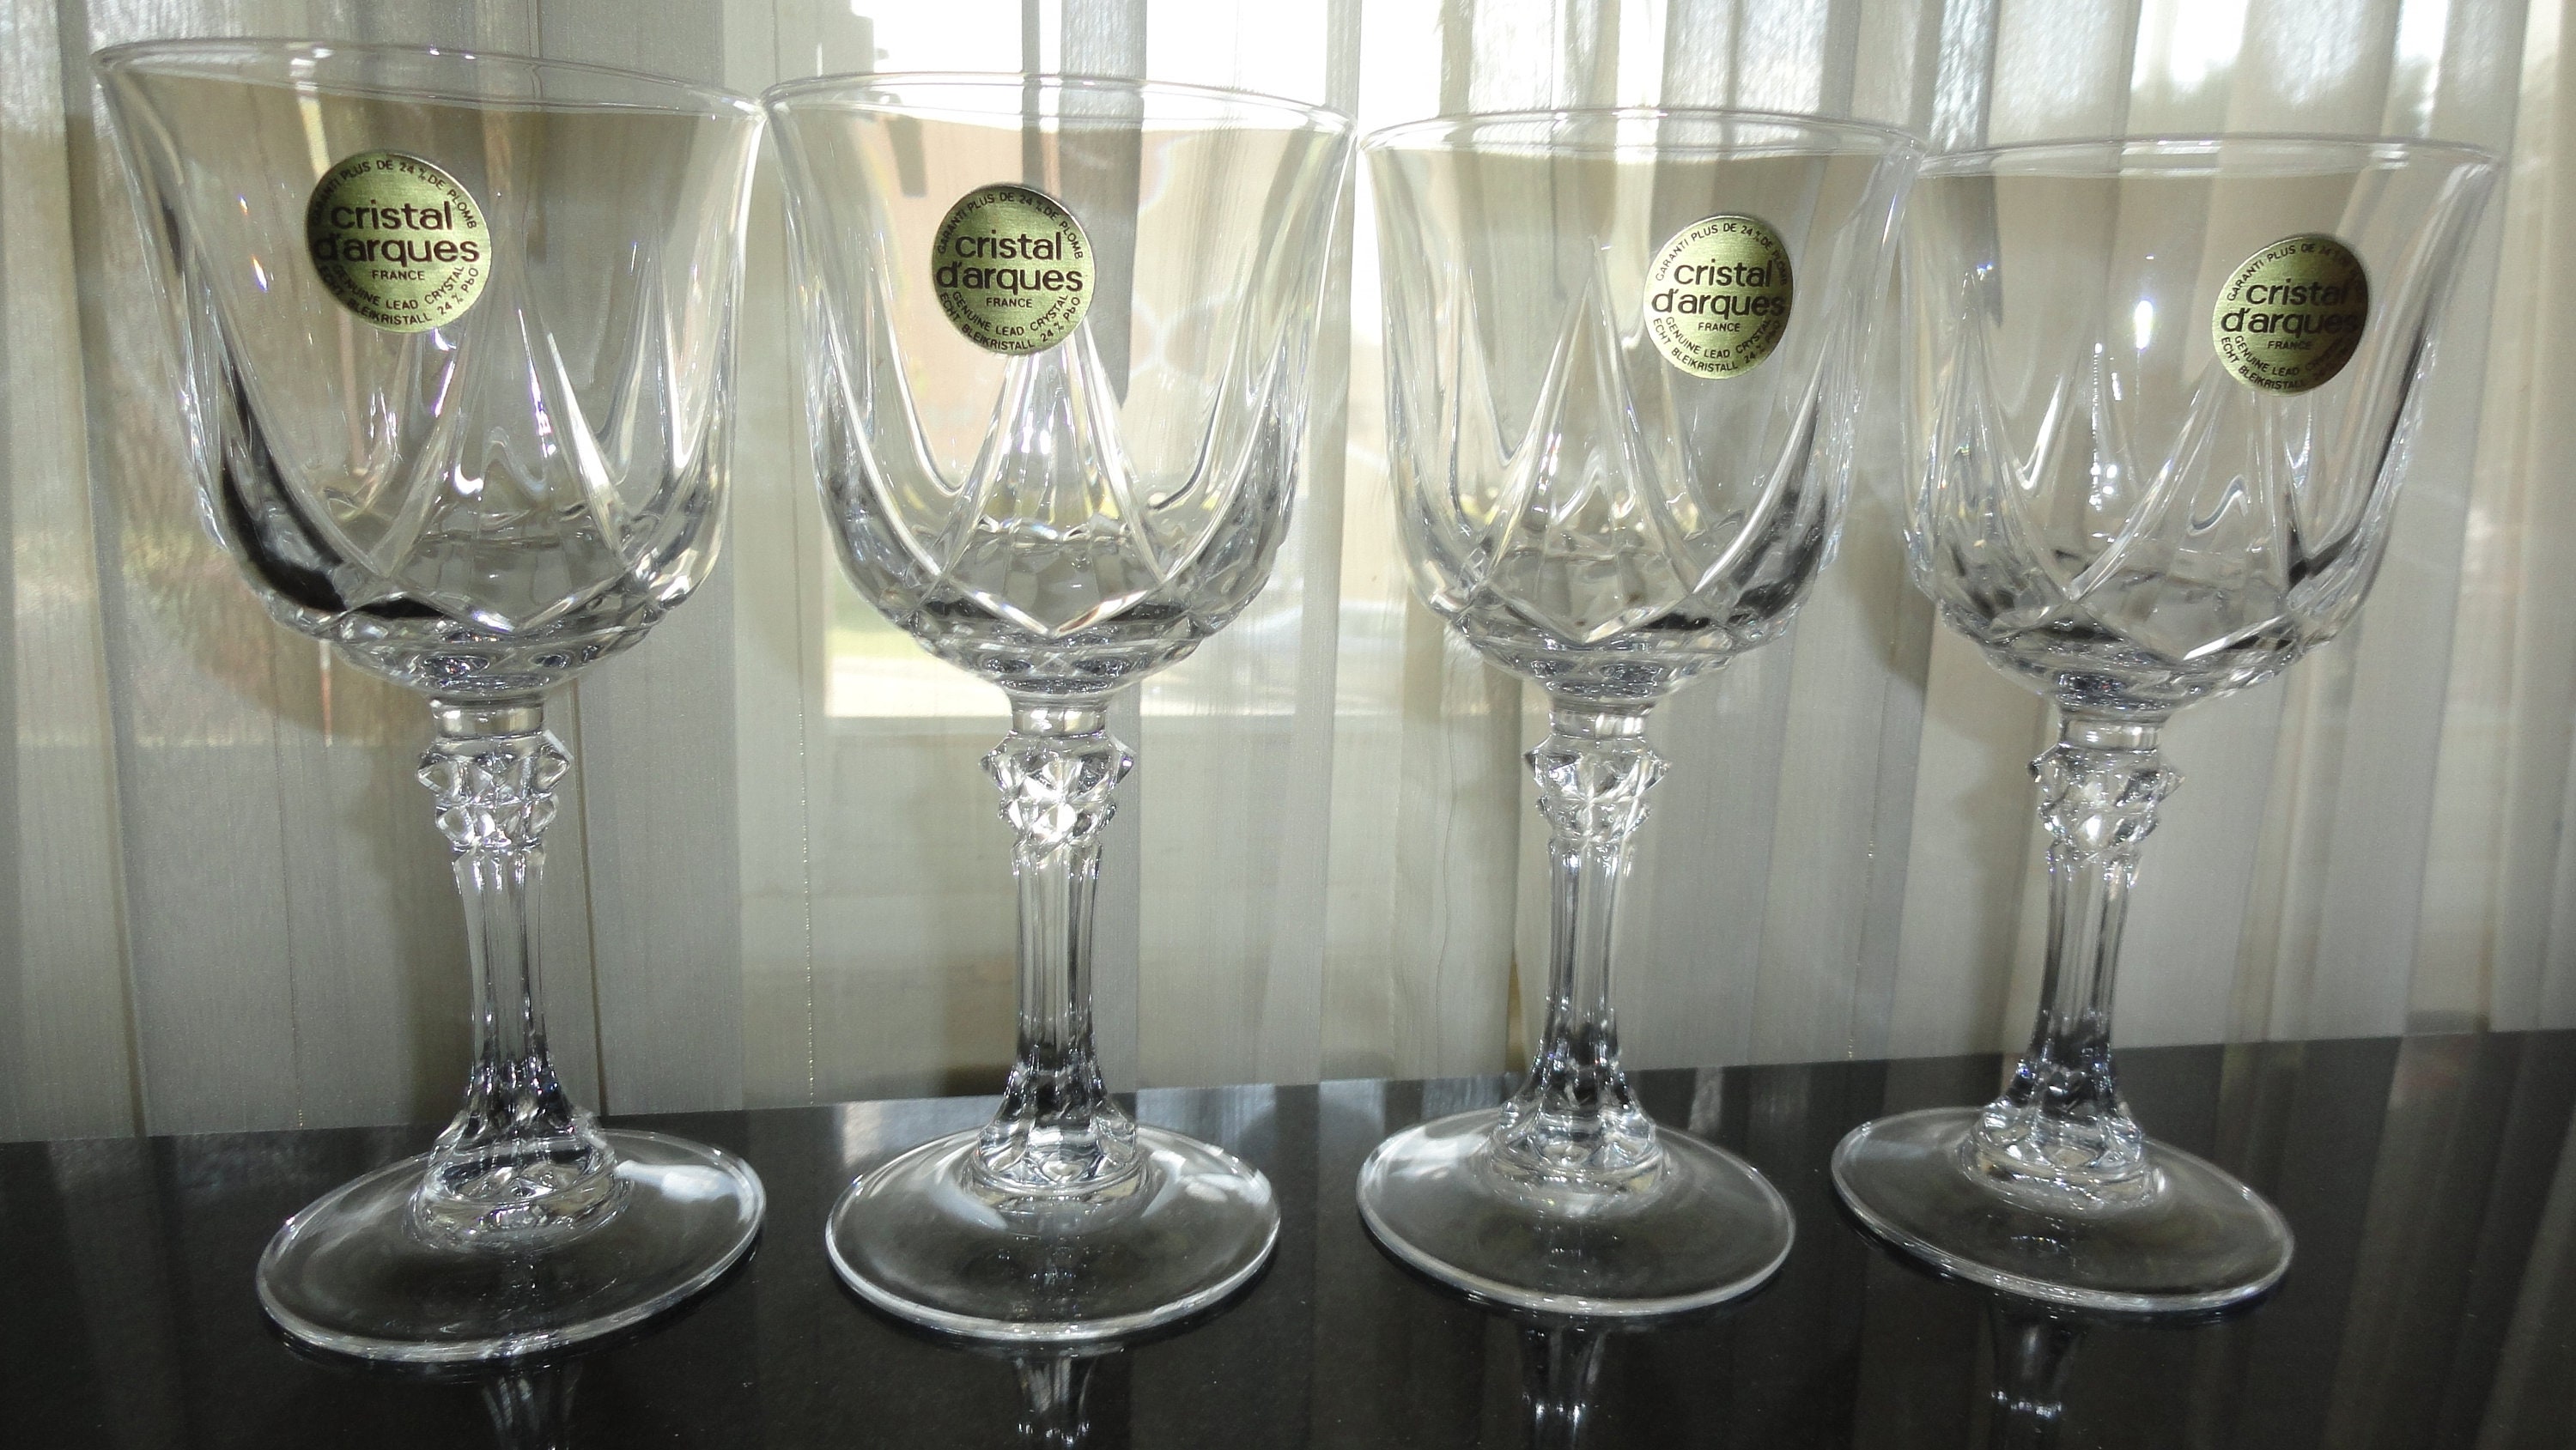 Vintage Cristal D'arques Wine Glasses Set of 4, Longchamp 24% Lead Crystal  Made in France Excellent Condition 